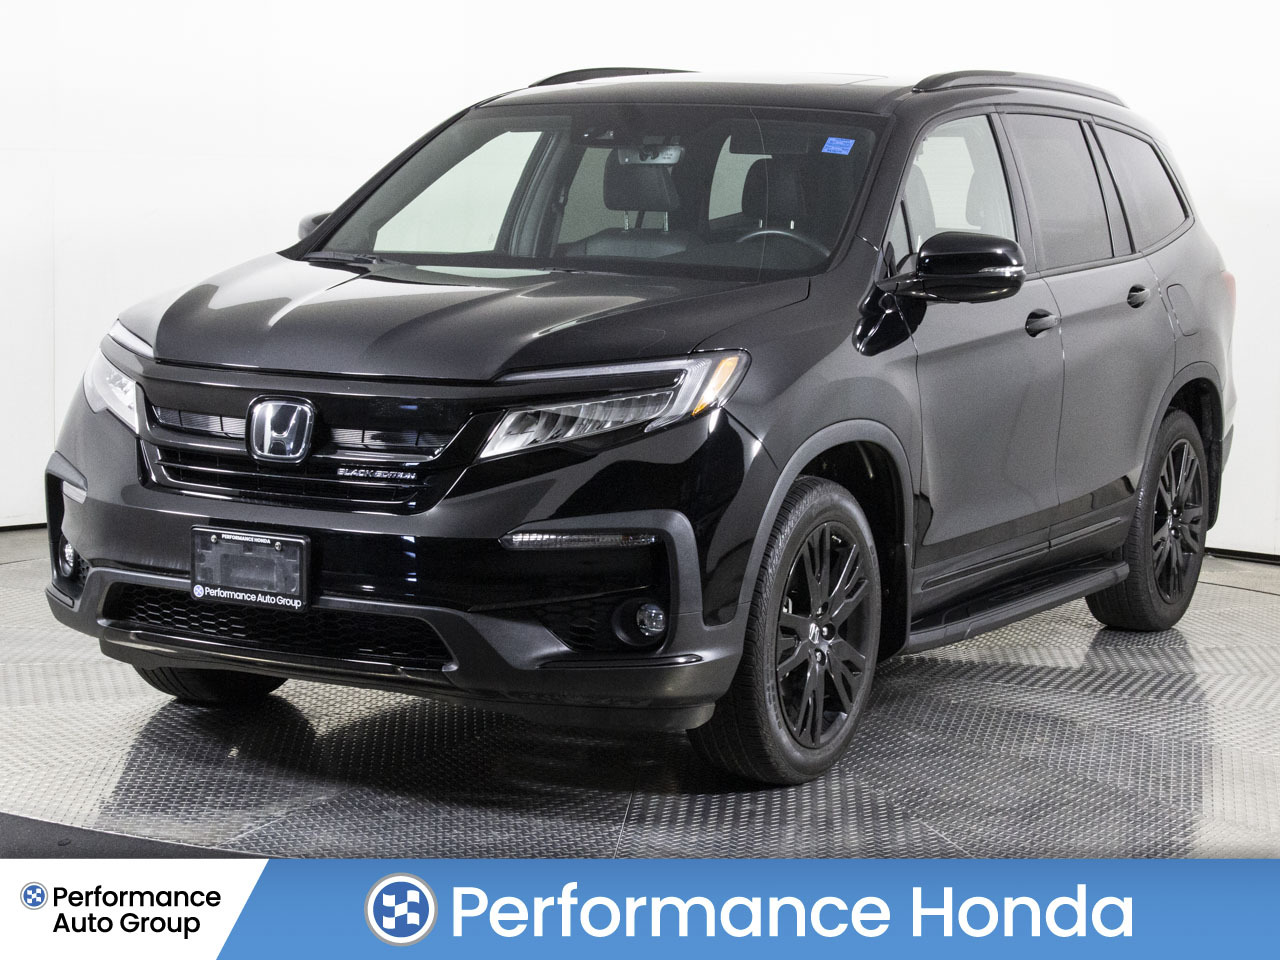 2019 Honda Pilot Black Edition AWD | SOLD SOLD SOLD SOLD!!!